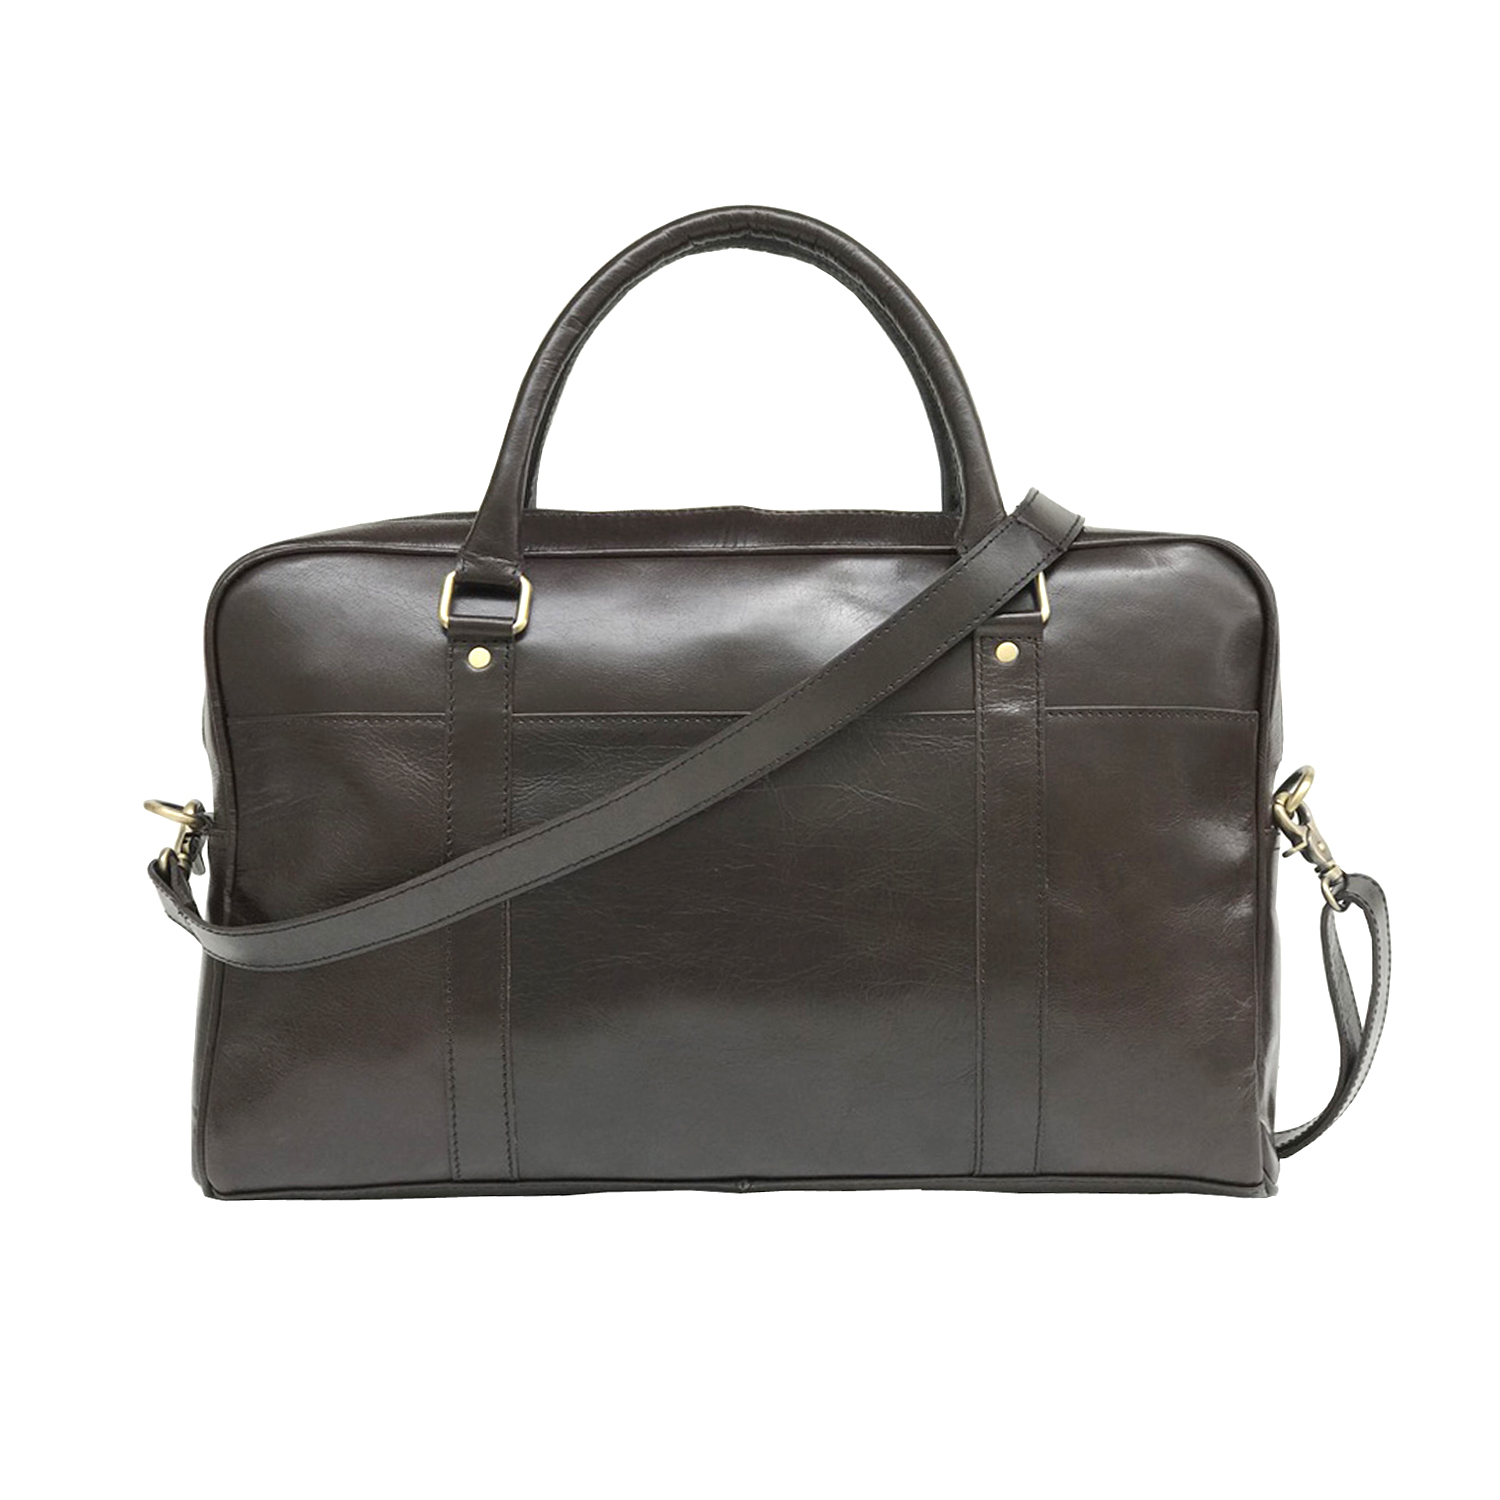 Executive -Leather Laptop Bag Coffee Brown – Affordable Leather Bags,Wallets,Jackets Online